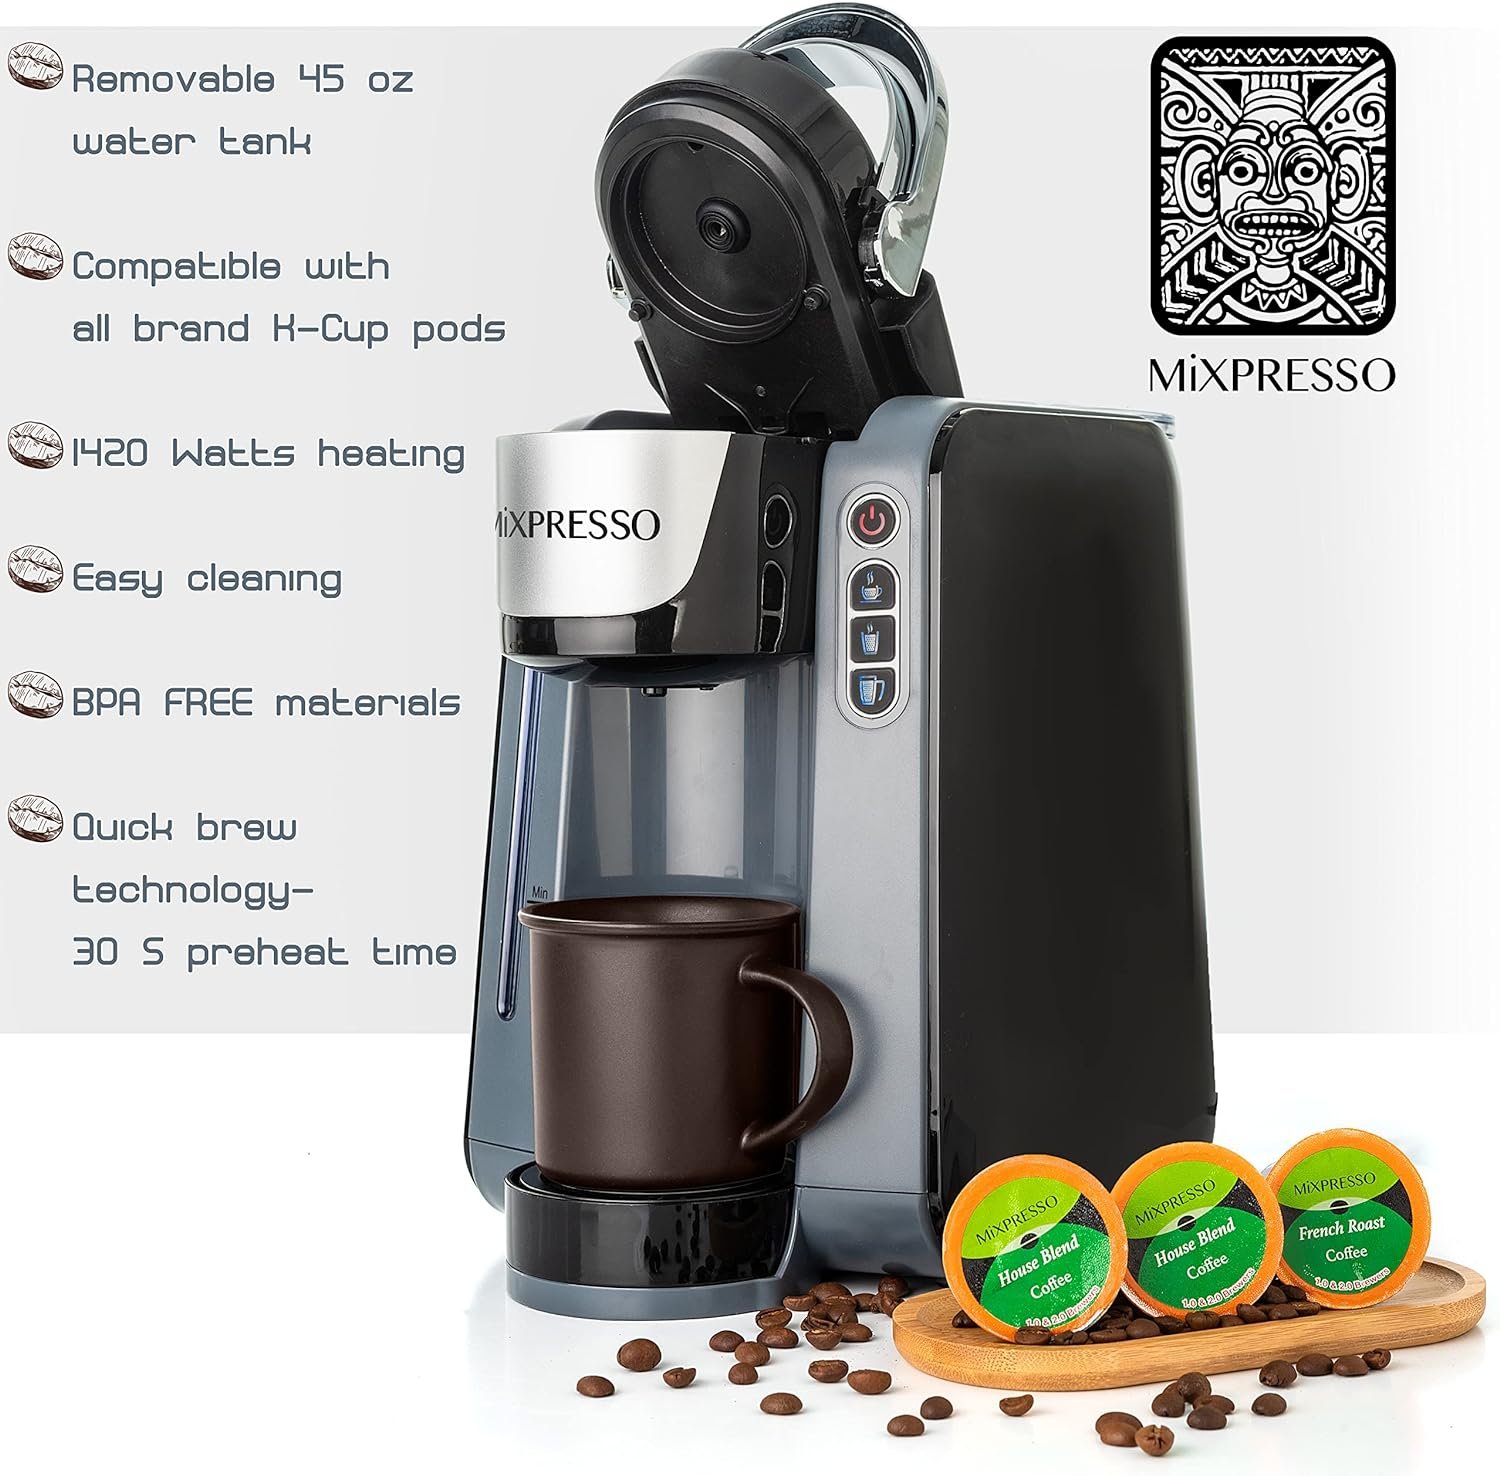 Mixpresso Single Serve K-Cup Coffee Maker Review